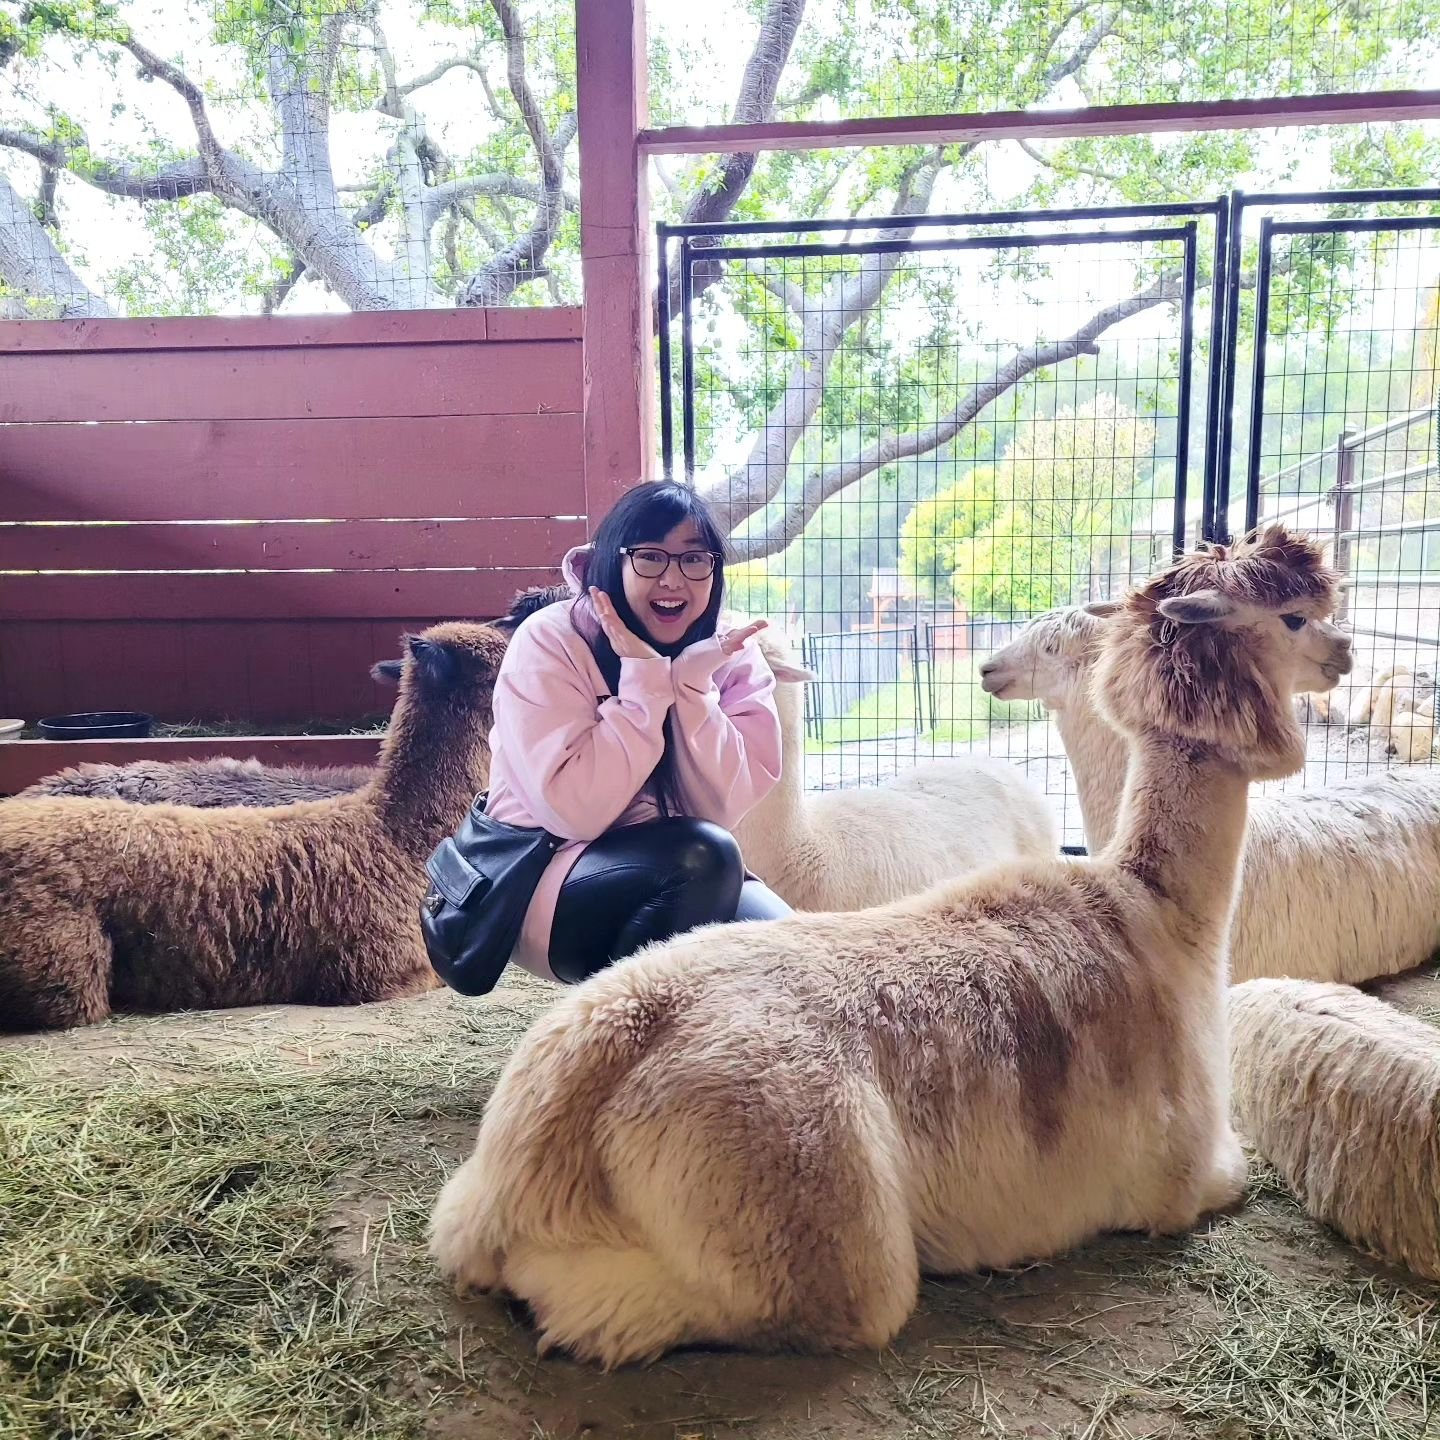 Visited the @canzellealpacas farm... if anyone wants to go, alpaca bag and llama go with you.

Just wanted to give awareness to this great place! 

If you're spittin' for a good time, come here! They wool be fleeced to meet you!!! :::joke drums:::

P